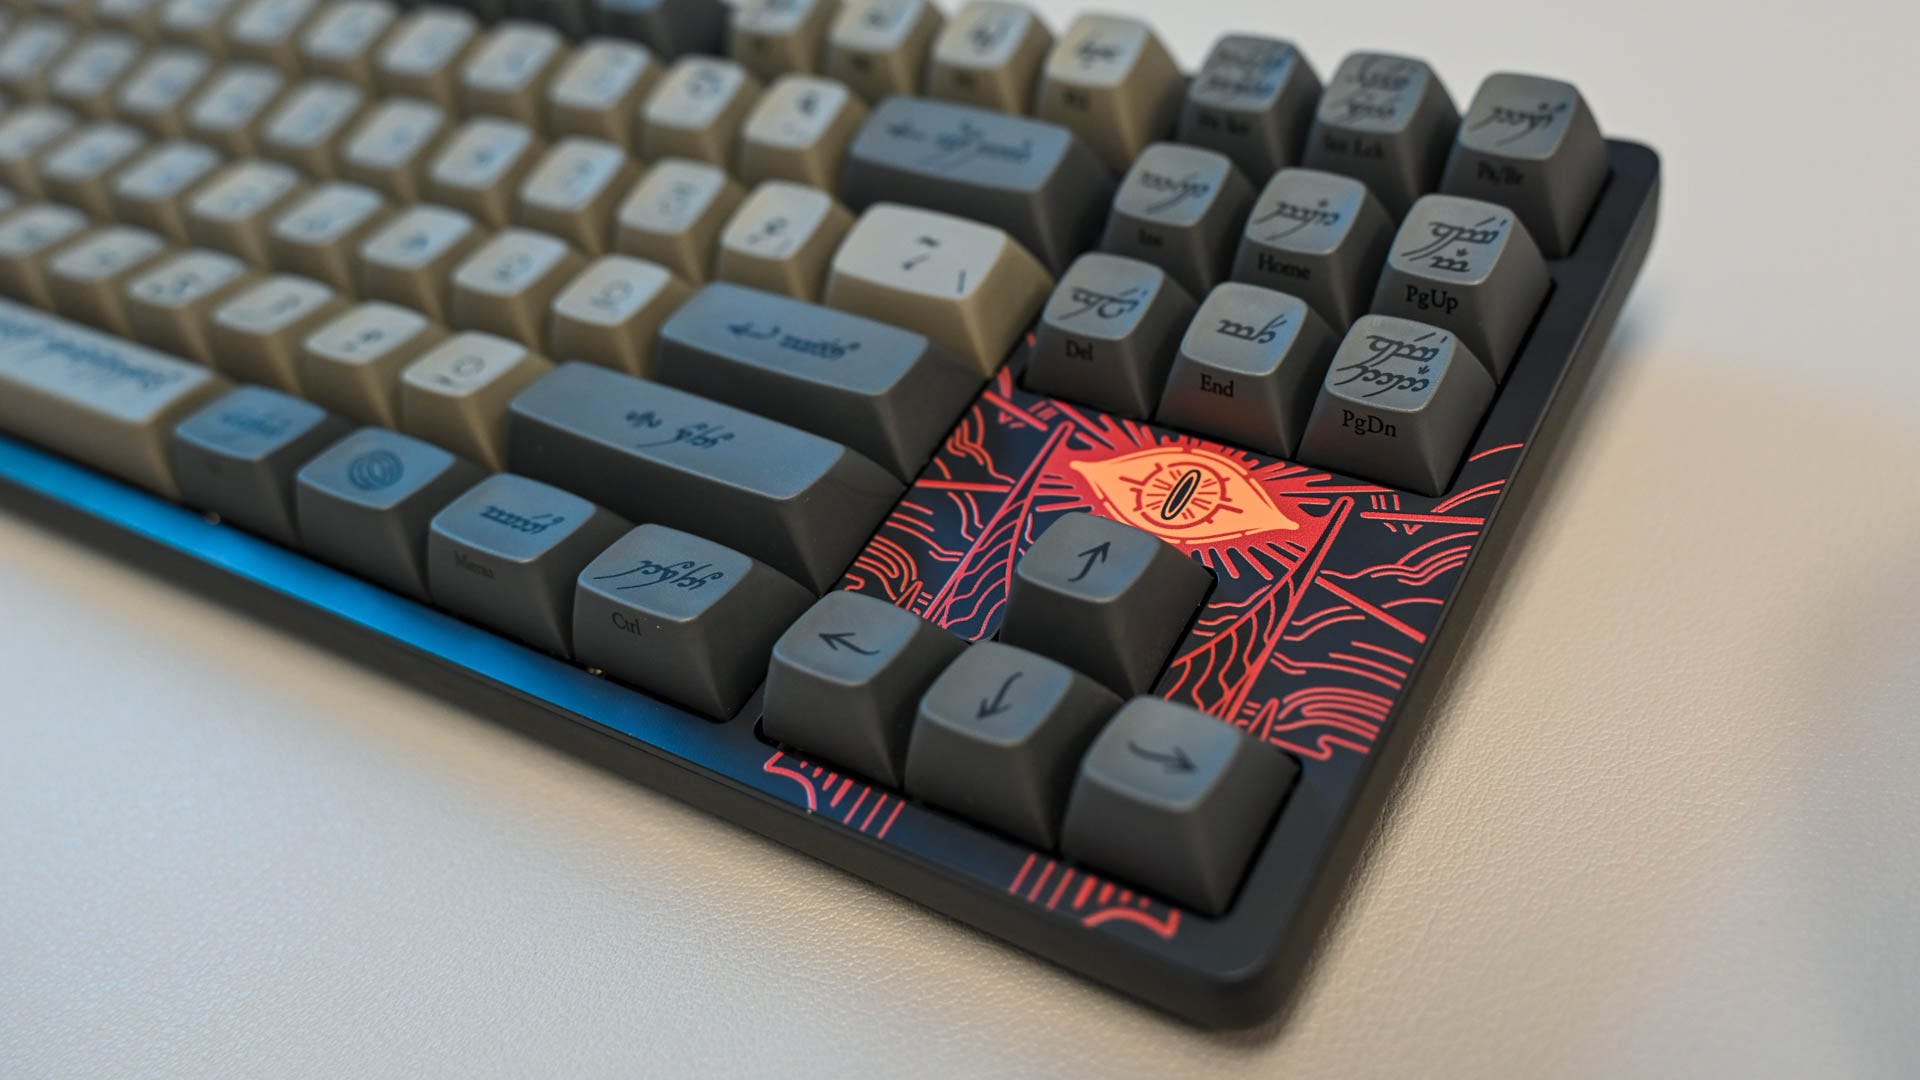 Eye of Sauron design on the Drop + The Lord of the Rings Black Speech Keyboard